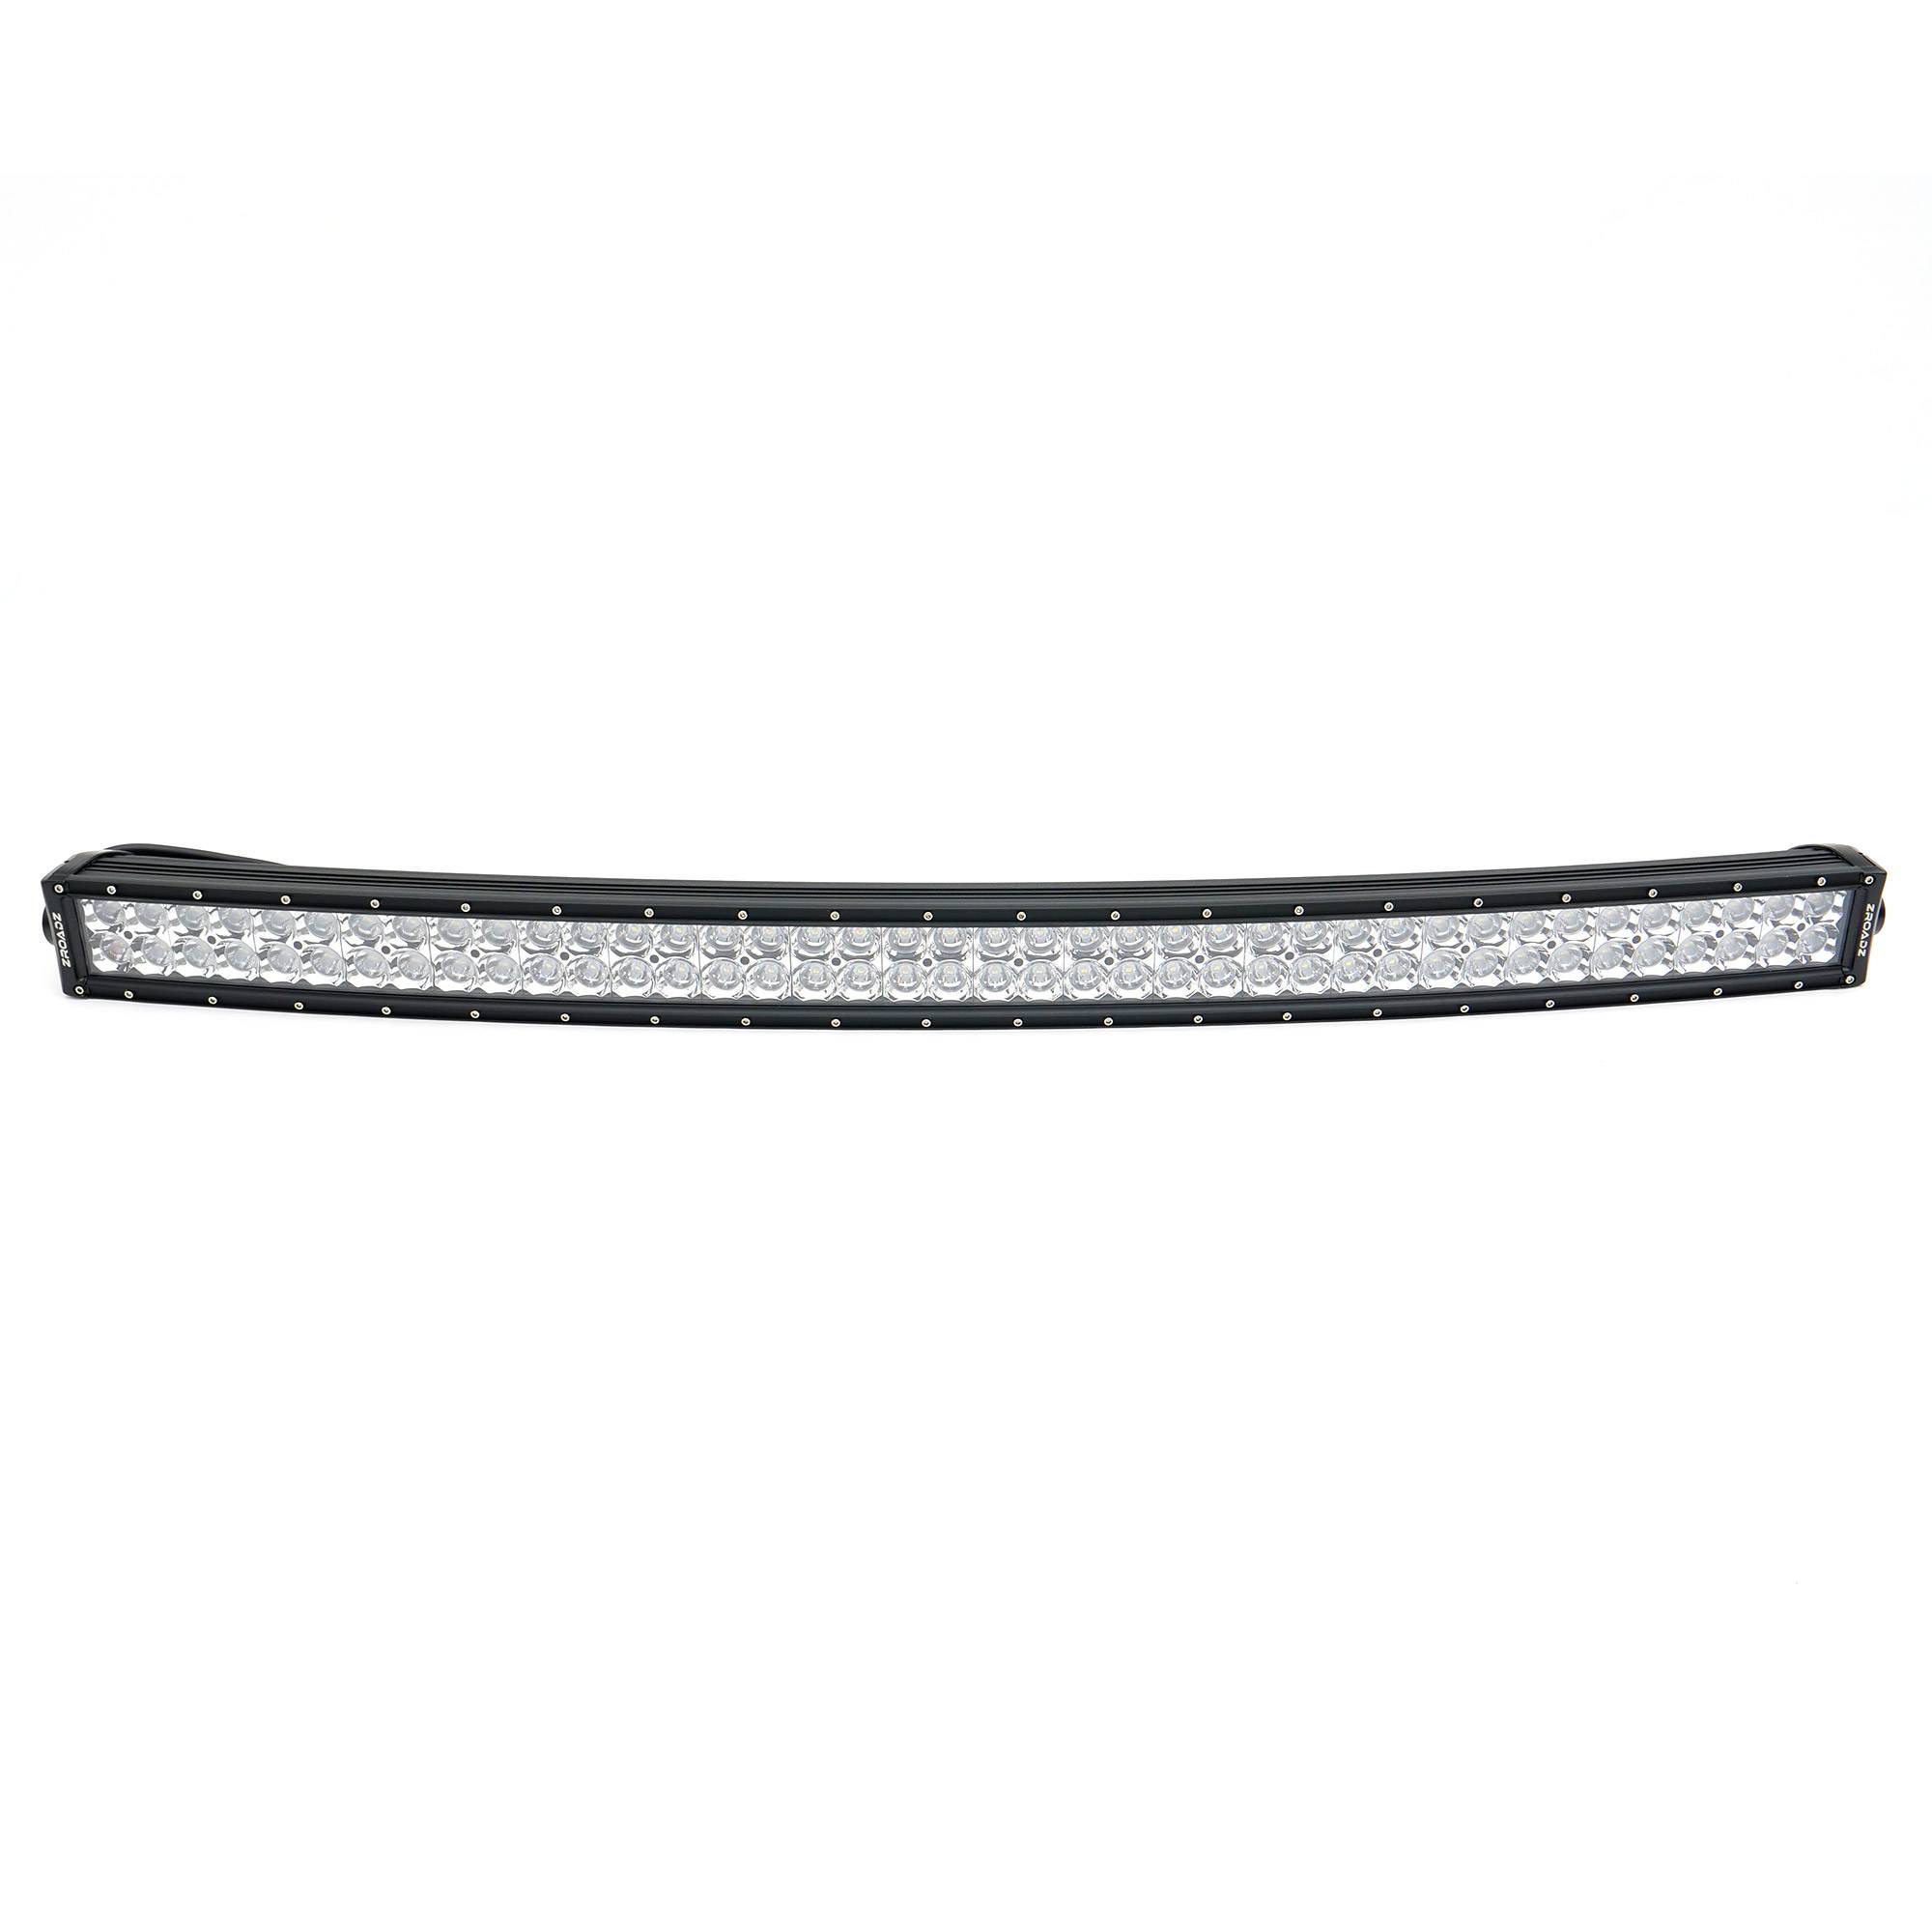 ZROADZ OFF ROAD PRODUCTS - 40 Inch LED Curved Double Row Light Bar - PN #Z30CBC14W240